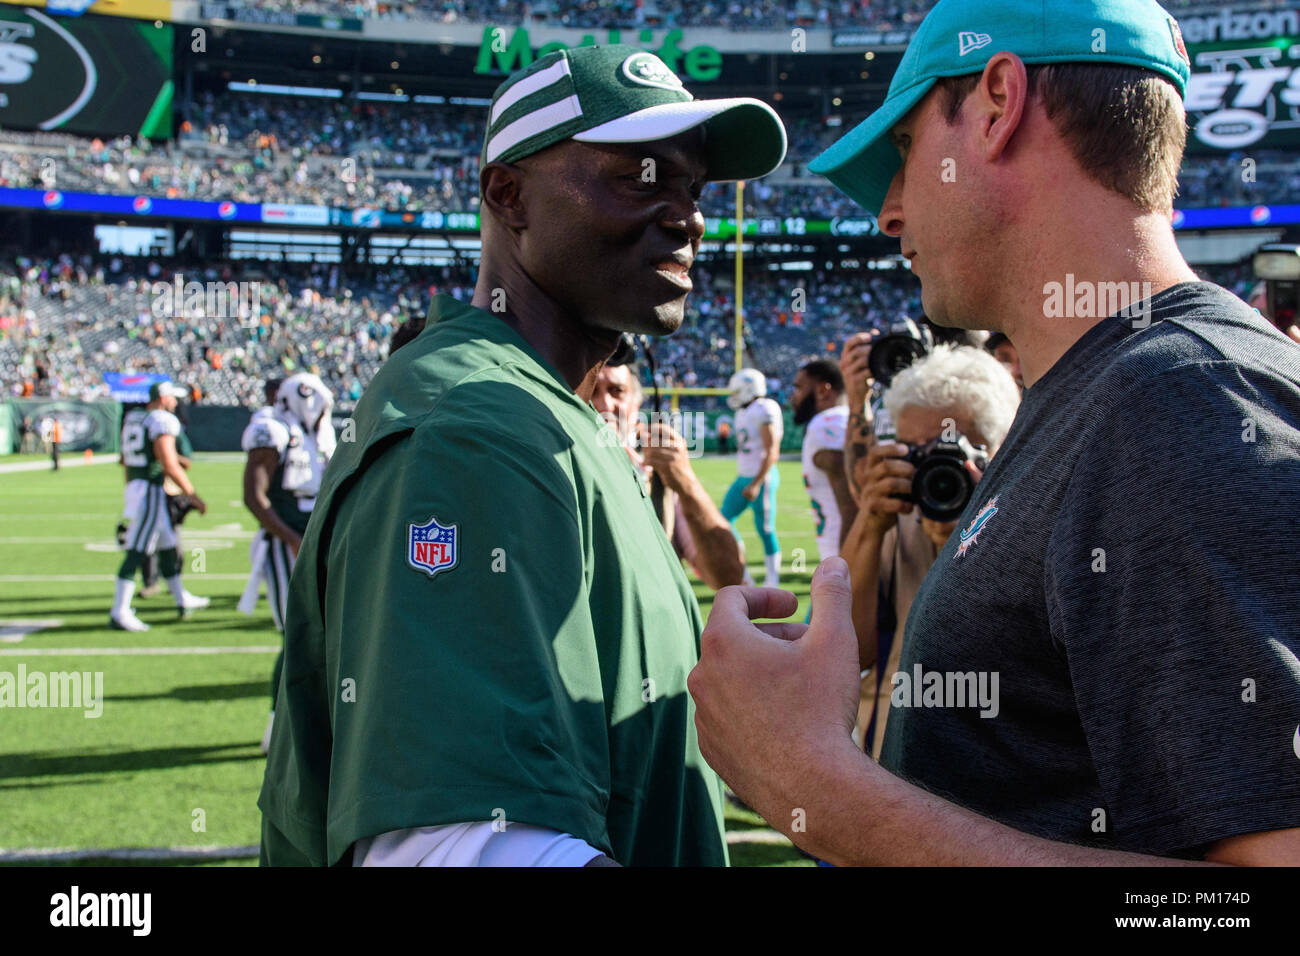 East Rutherford, NJ, USA. 16th Sep, 2018. New York Jets head coach Todd  Bowles and Miami Dolphins head coach Adam Gase shake hands after the game  between The New York Jets and